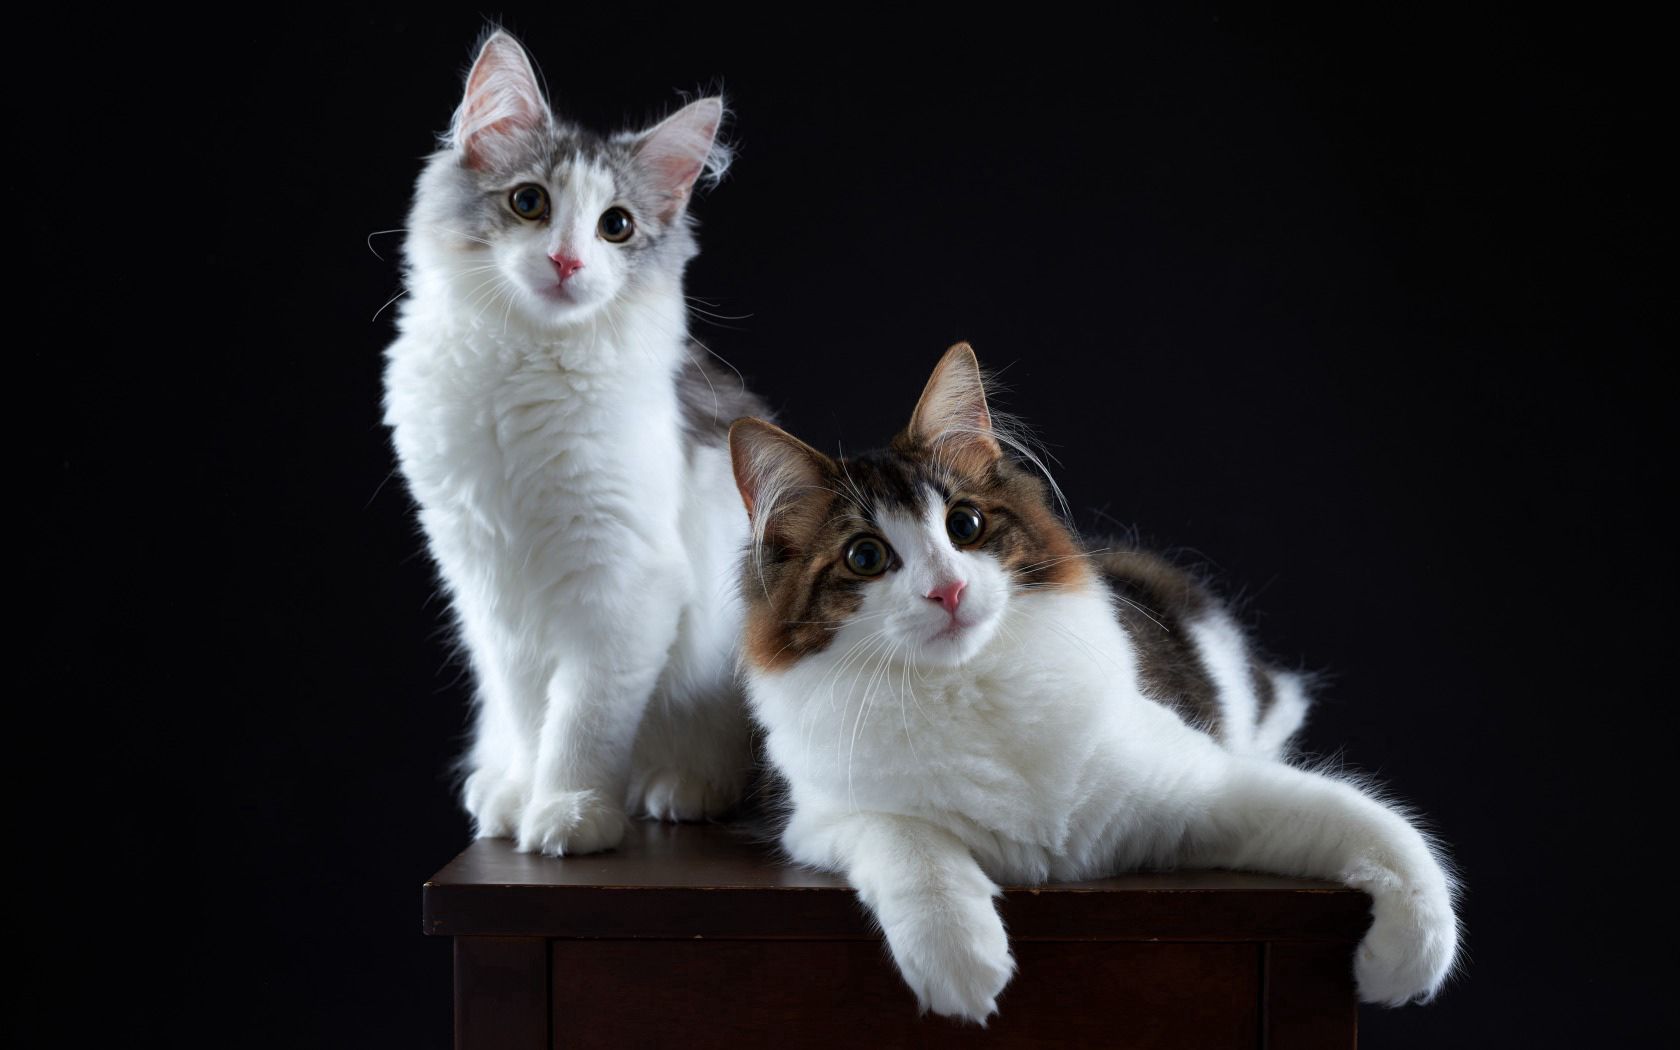 cats, animals, fluffy, couple, pair Image for desktop